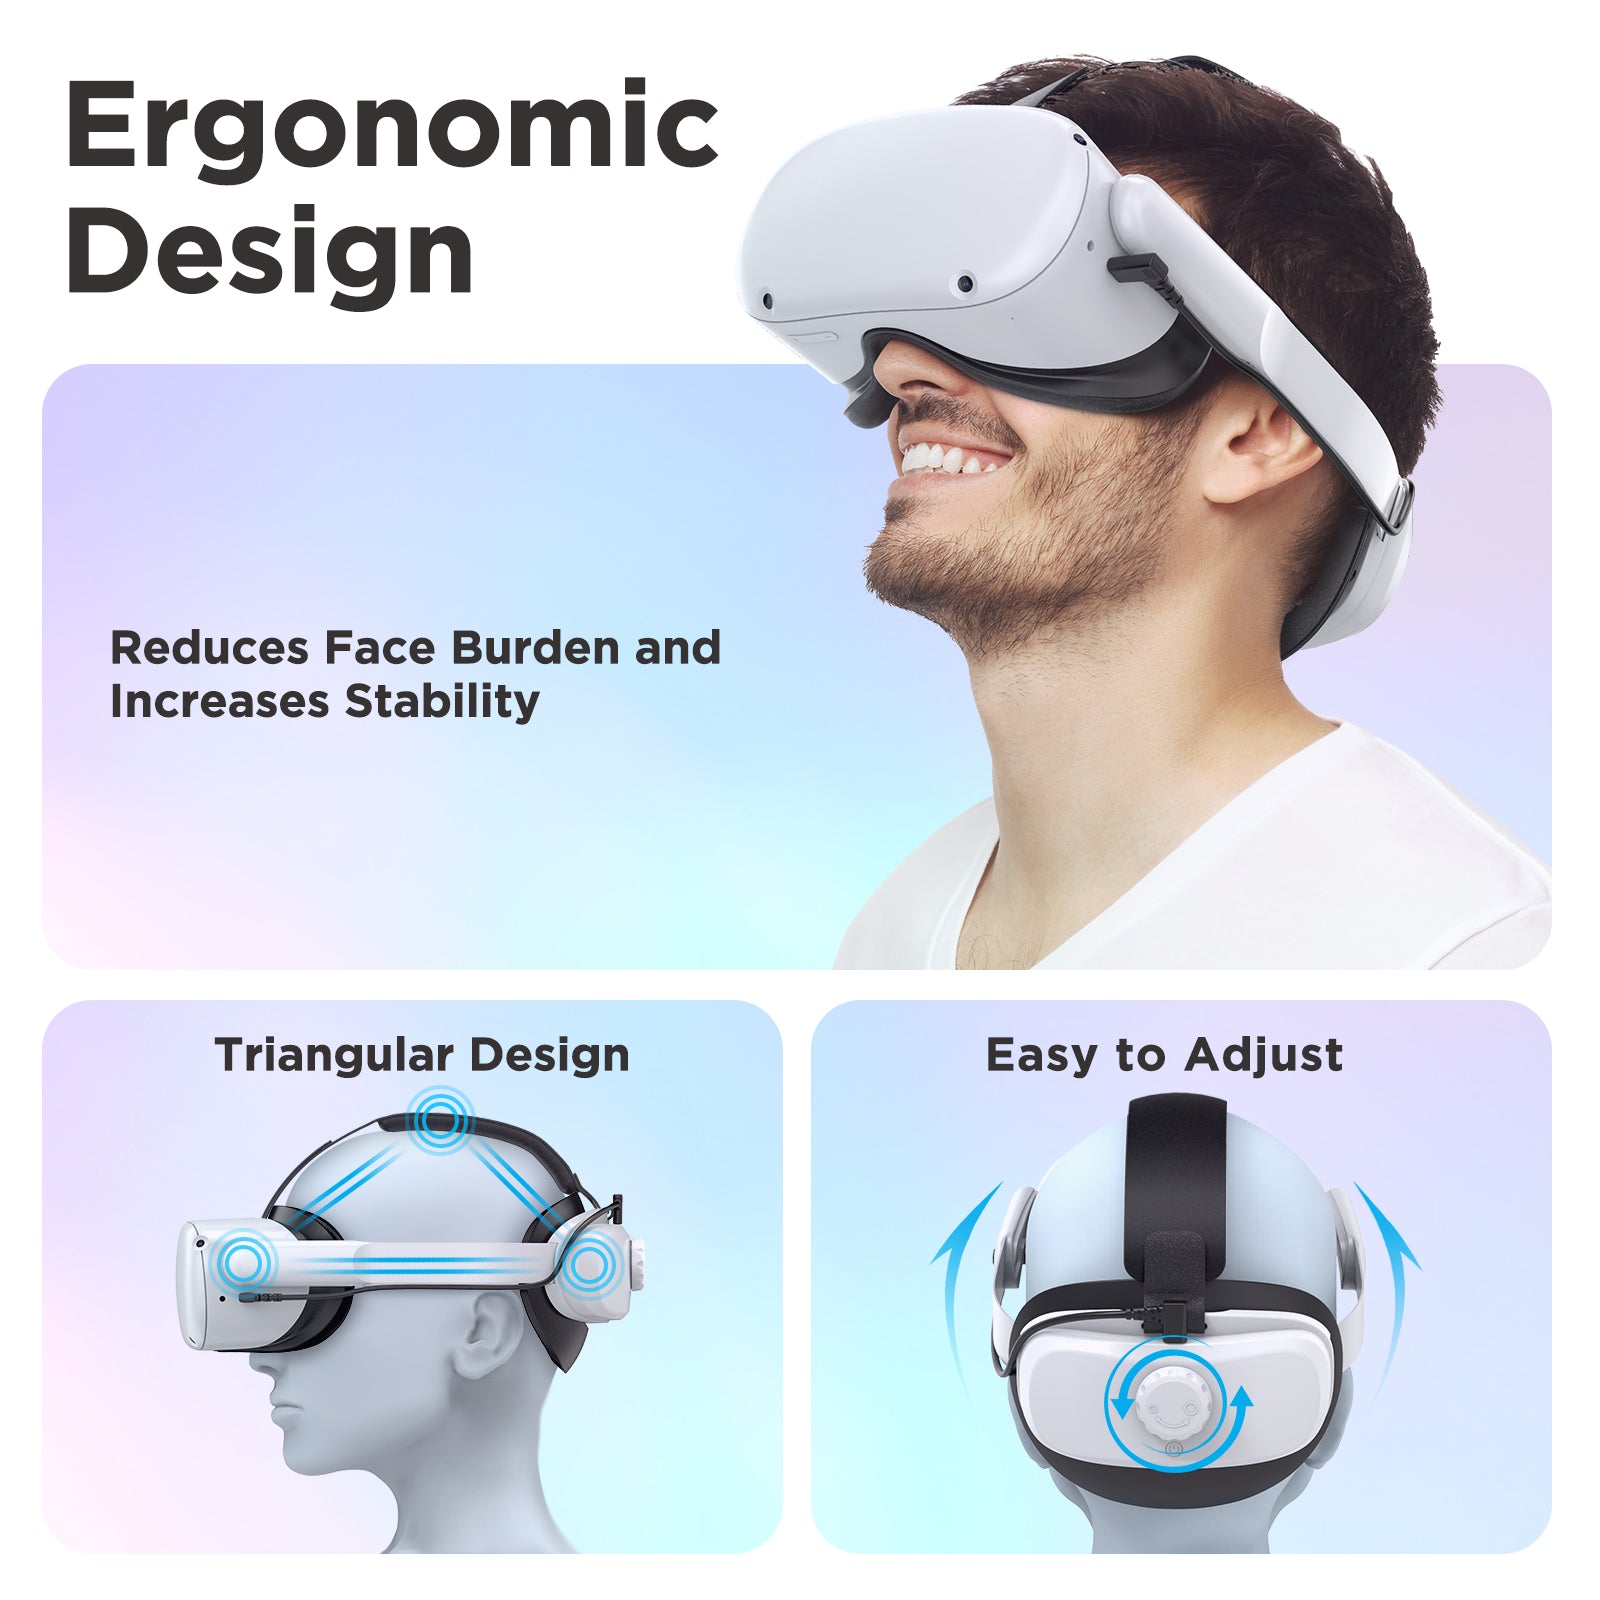 Adjustable 5000mAh Battery Head Strap YOGES Q8 Headstrap Compatible with Oculus Quest 2